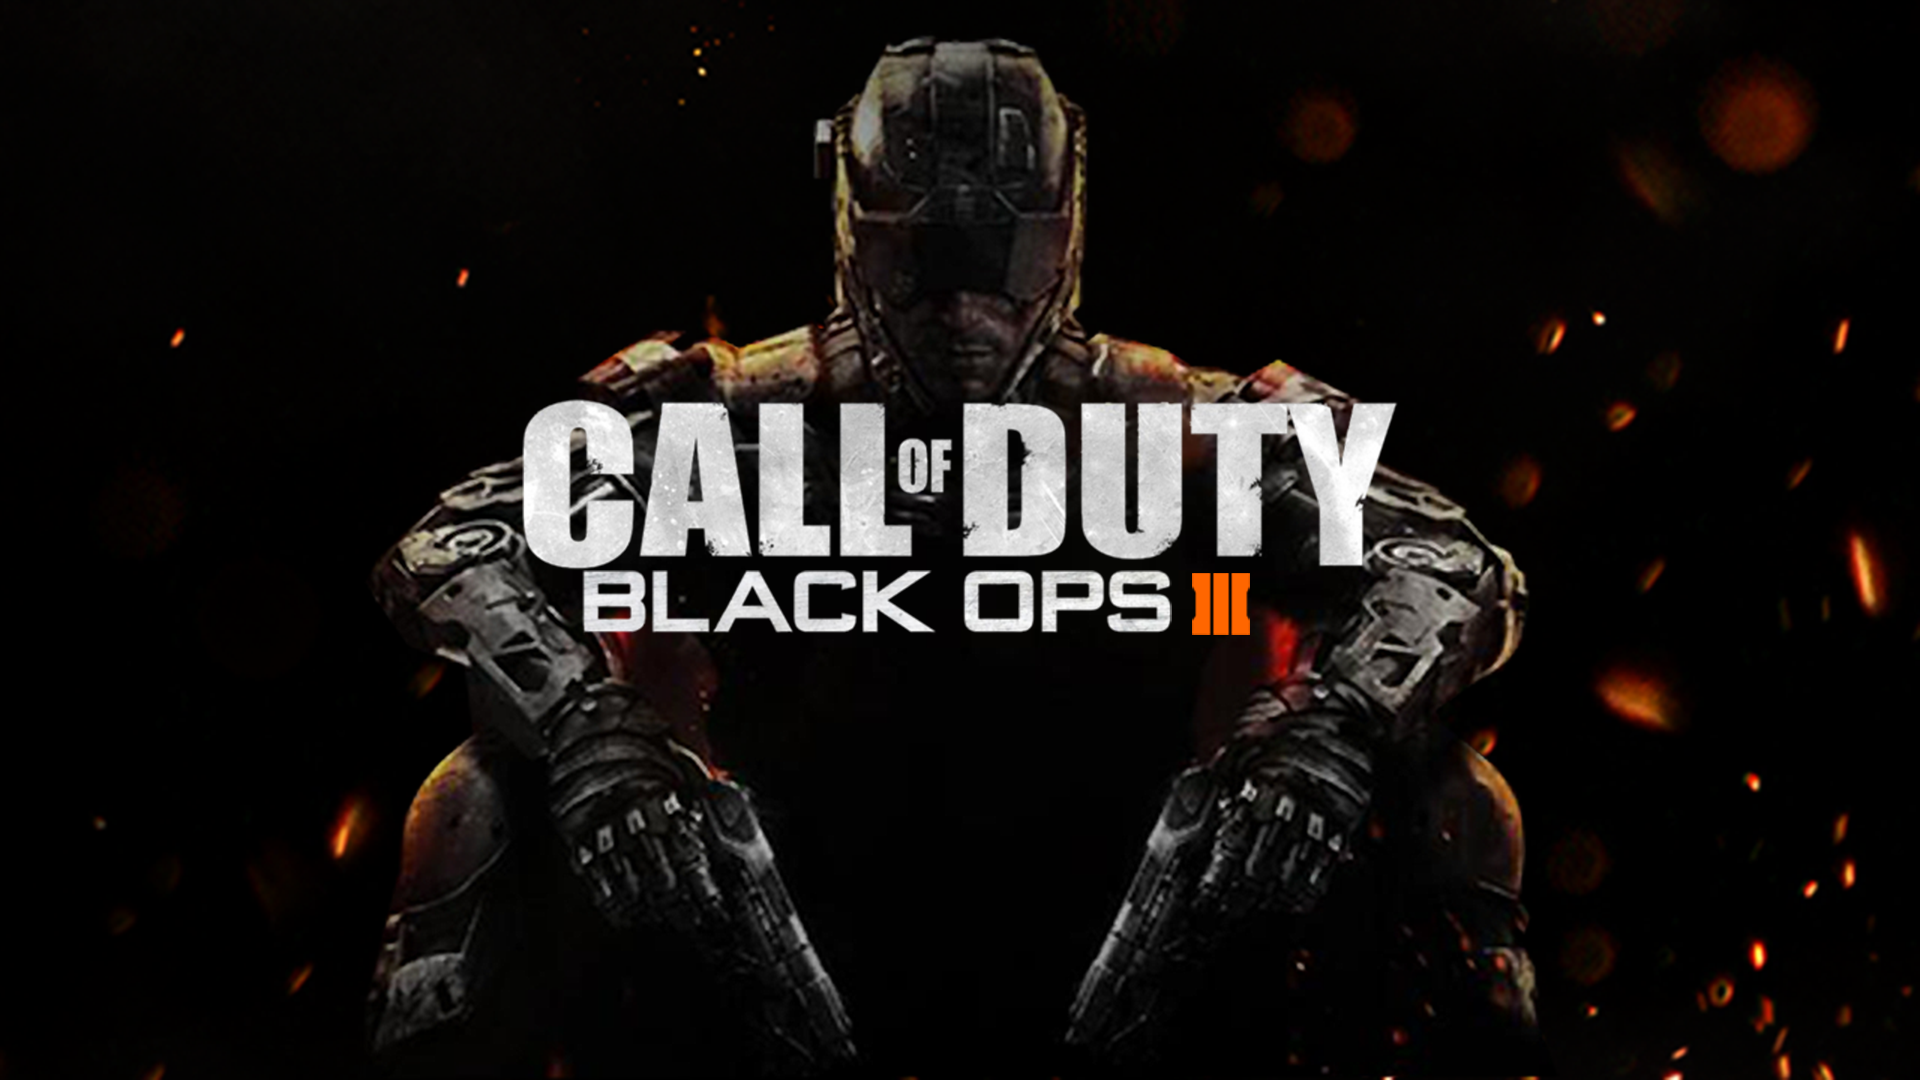 Amazing Call Of Duty: Black Ops III Pictures & Backgrounds